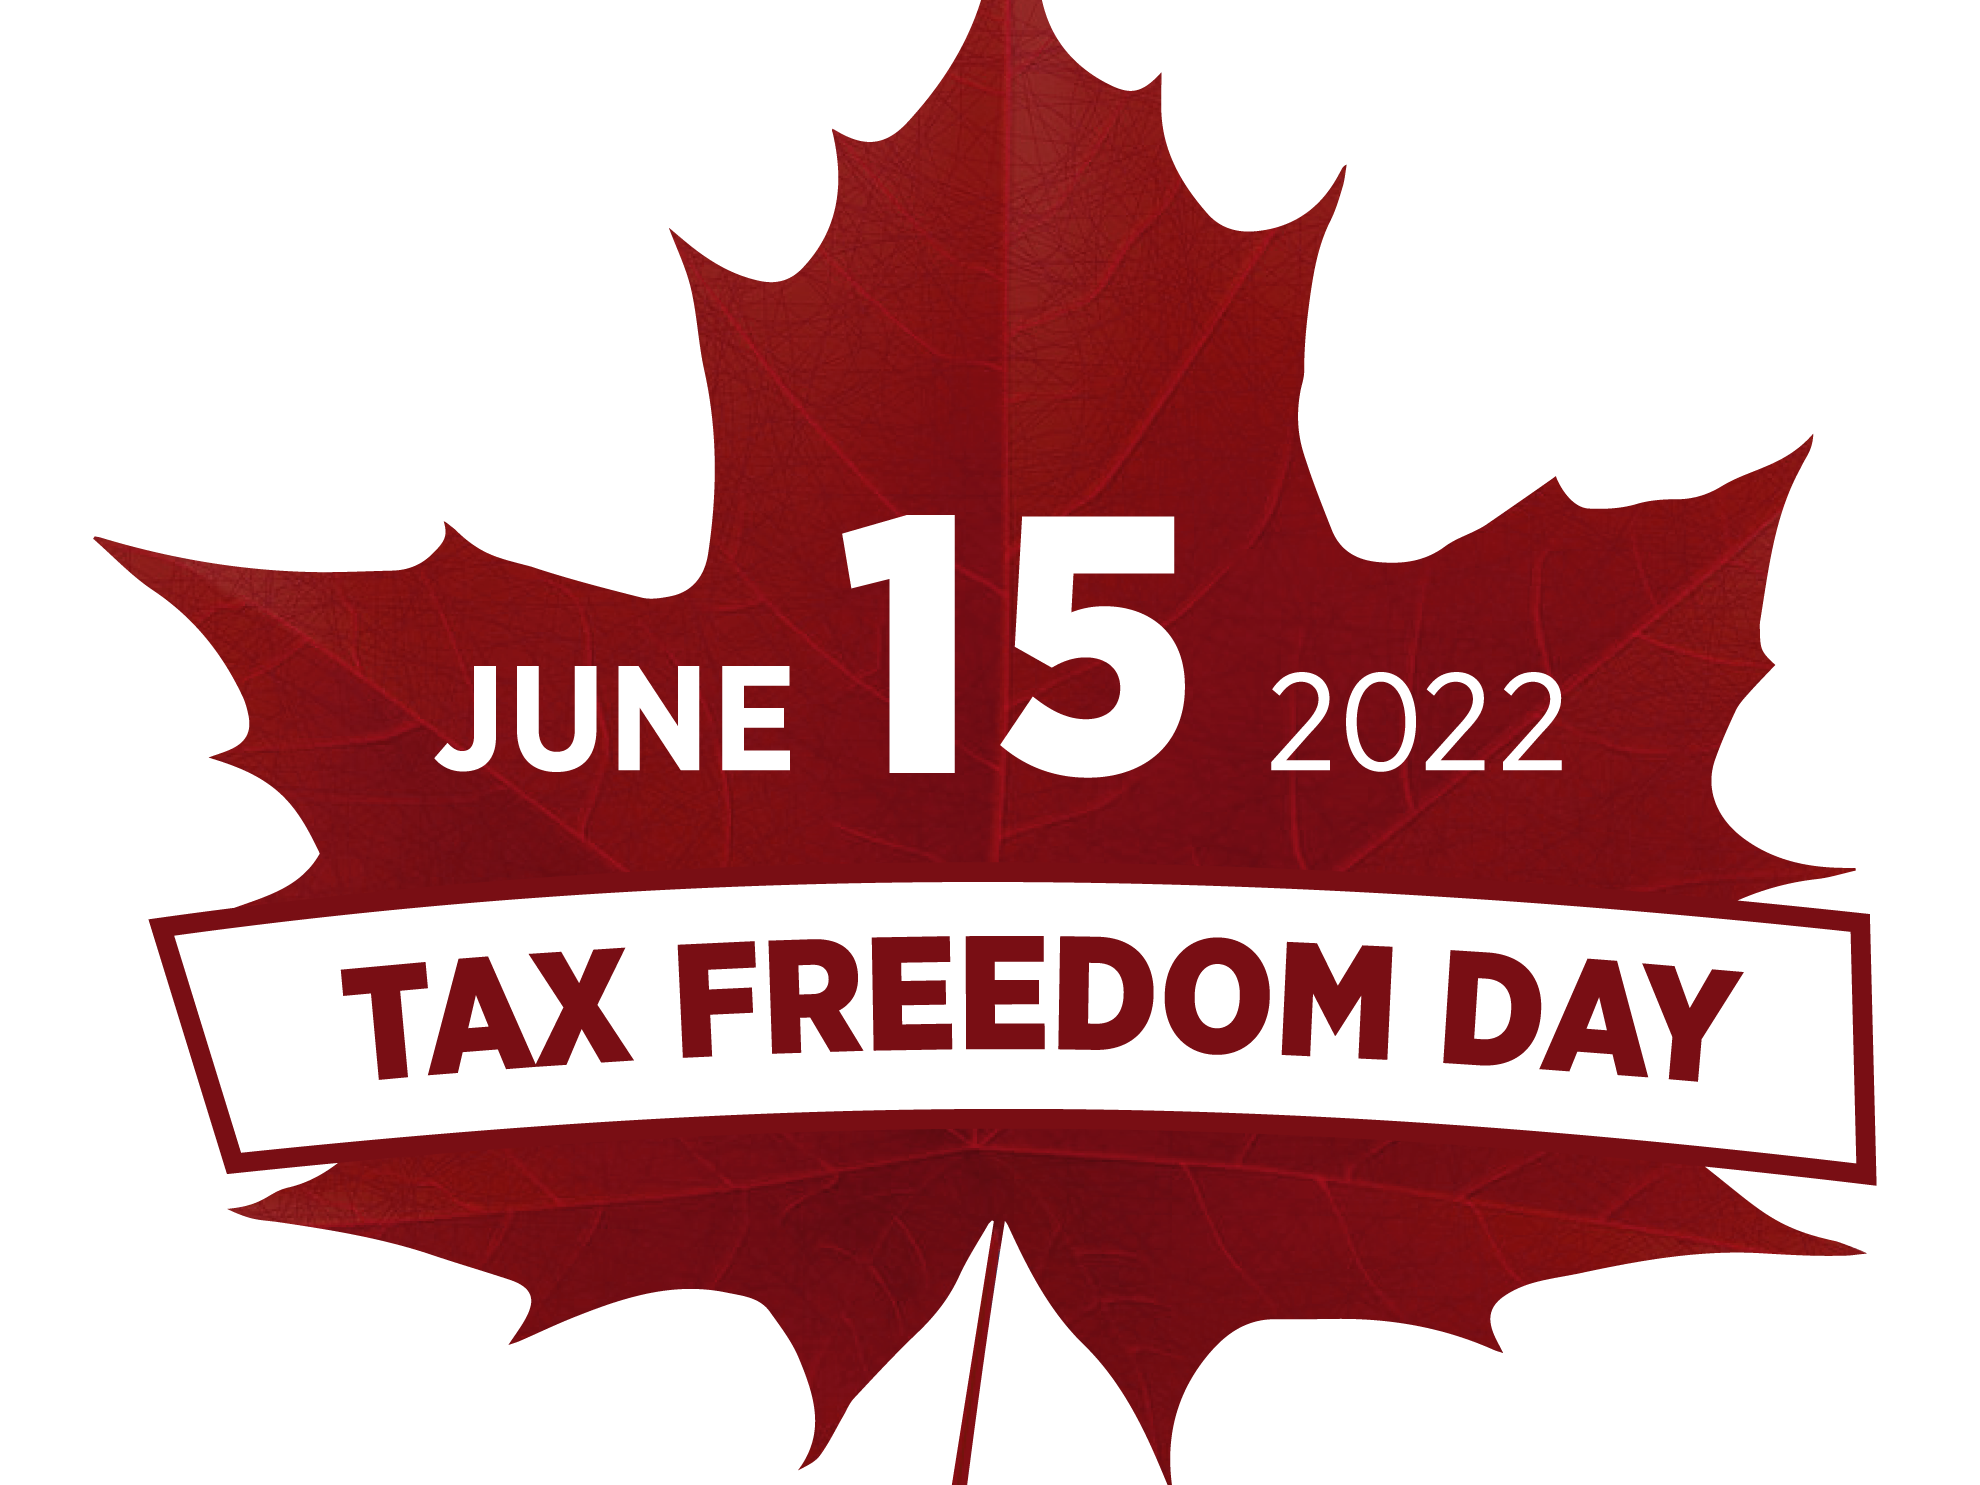 GOLDSTEIN Tax Freedom Day for Canadians the latest in 15 years